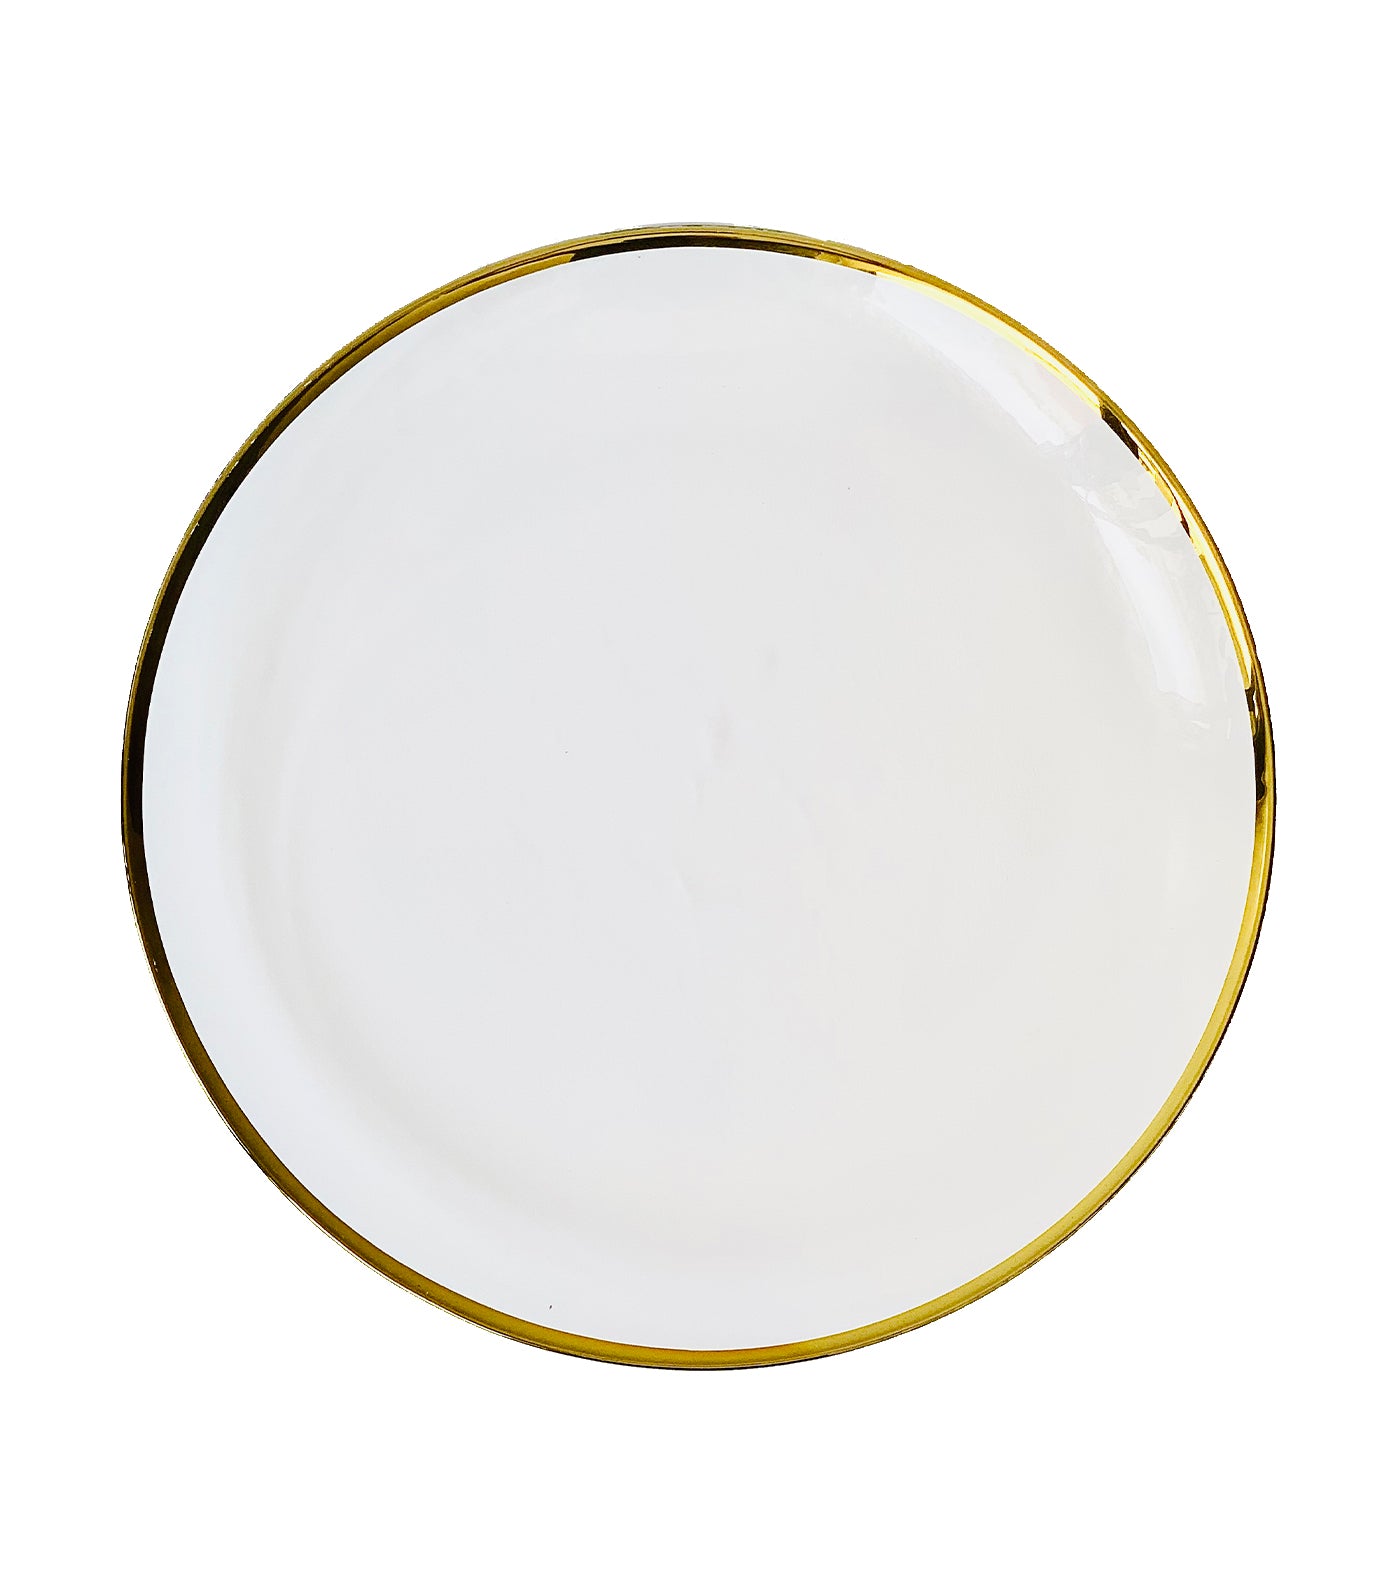 Glass Plate with Gold Rim Collection